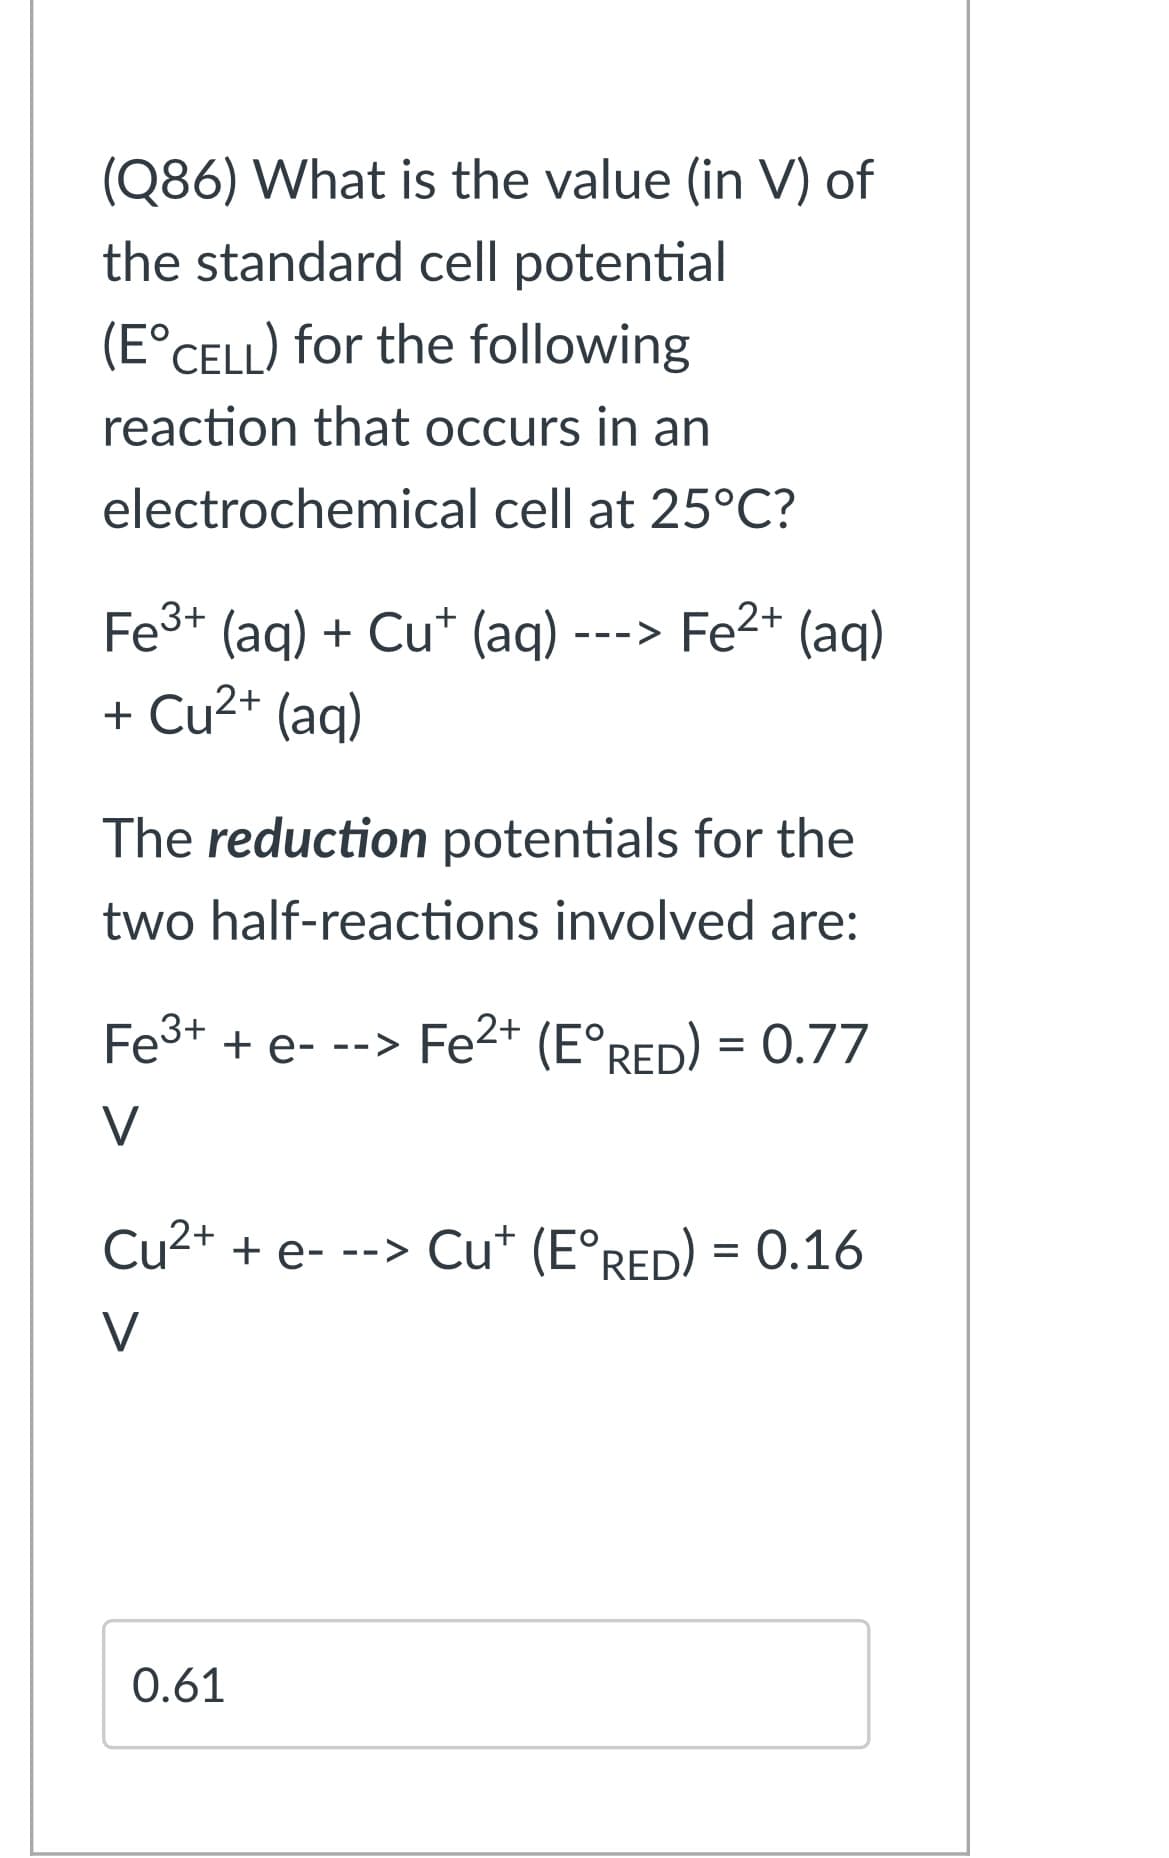 (Q86) What is the value (in V) of
the standard cell potential
(E°CELL) for the following
reaction that occurs in an
electrochemical cell at 25°C?
Fe3+ (aq) + Cu* (aq) ---> Fe2+ (aq)
+ Cu2+ (aq)
The reduction potentials for the
two half-reactions involved are:
Fe3+ + e- --> Fe2+ (E°RED) = 0.77
V
Cu2+ + e- --> Cu* (E°RED) = 0.16
V
0.61
